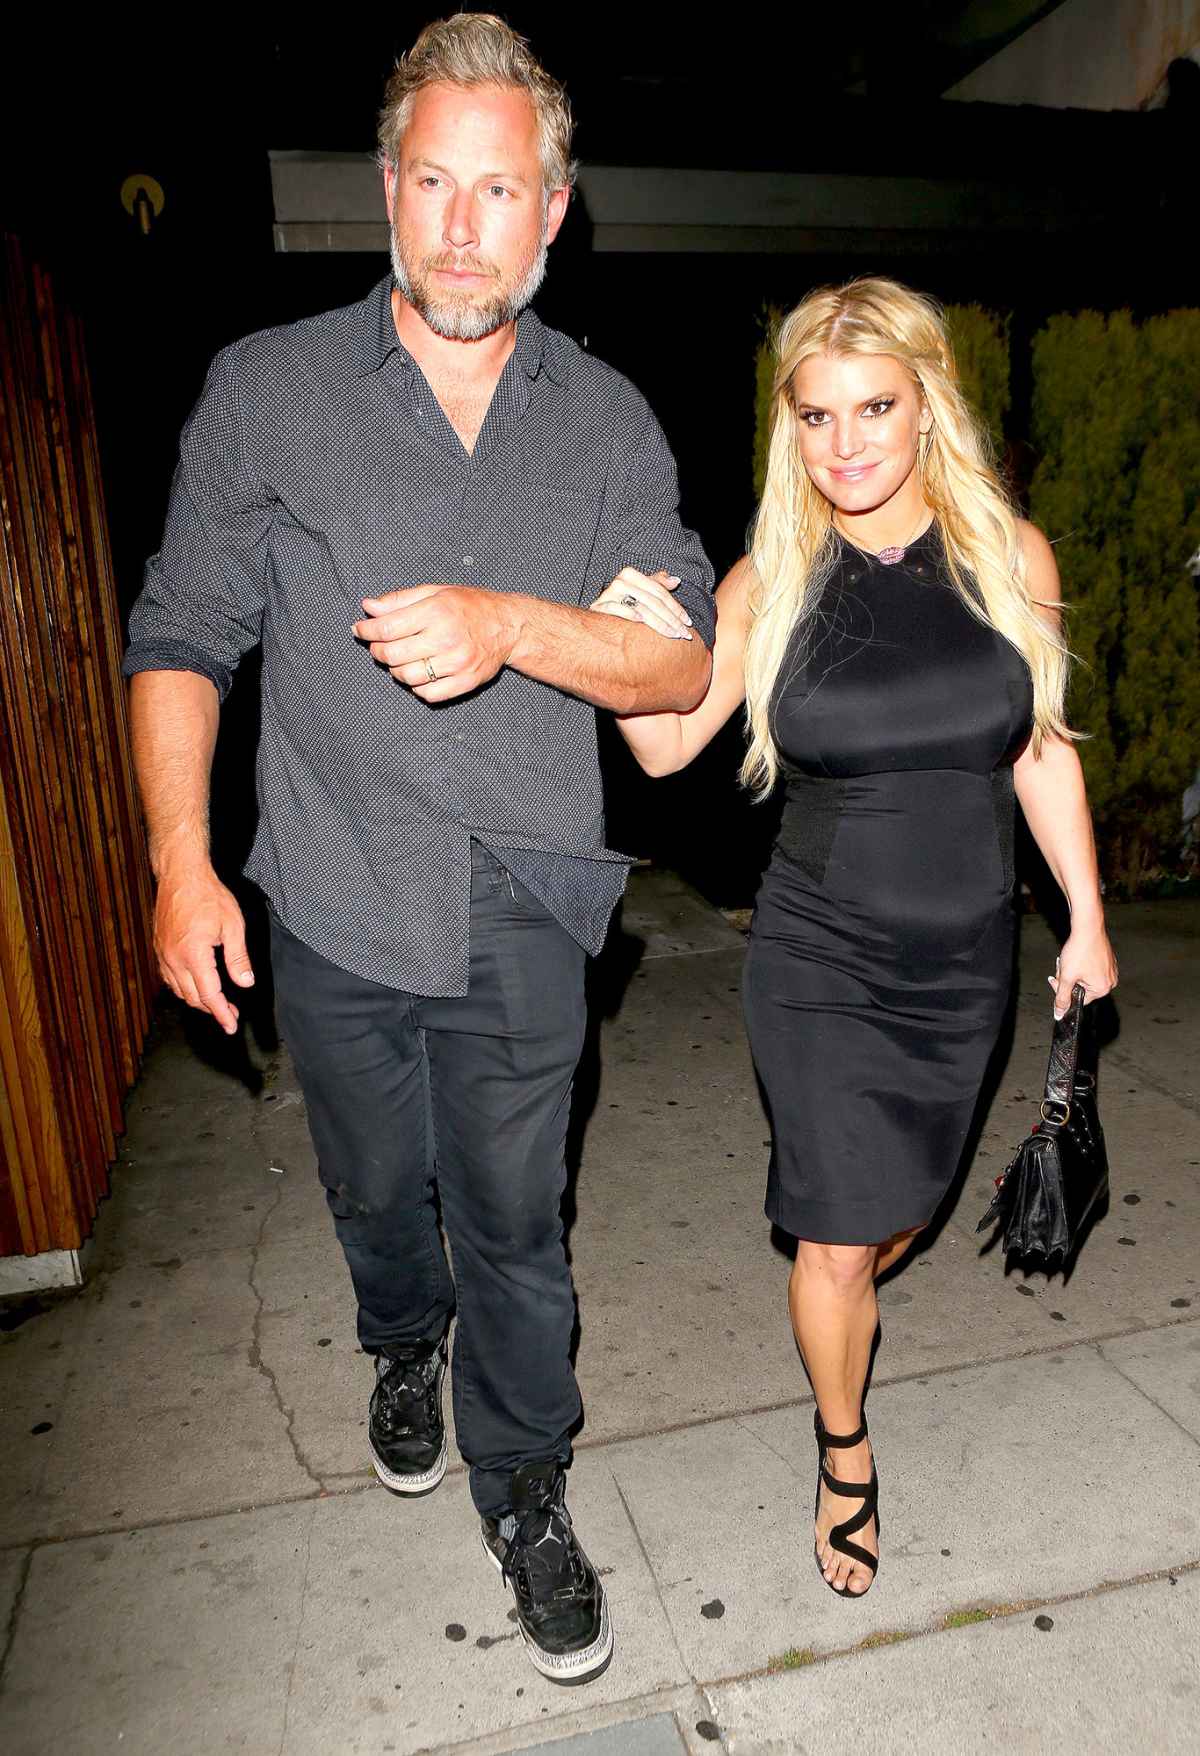 Jessica Simpson Works Curves in Tight Black Dress: Photo